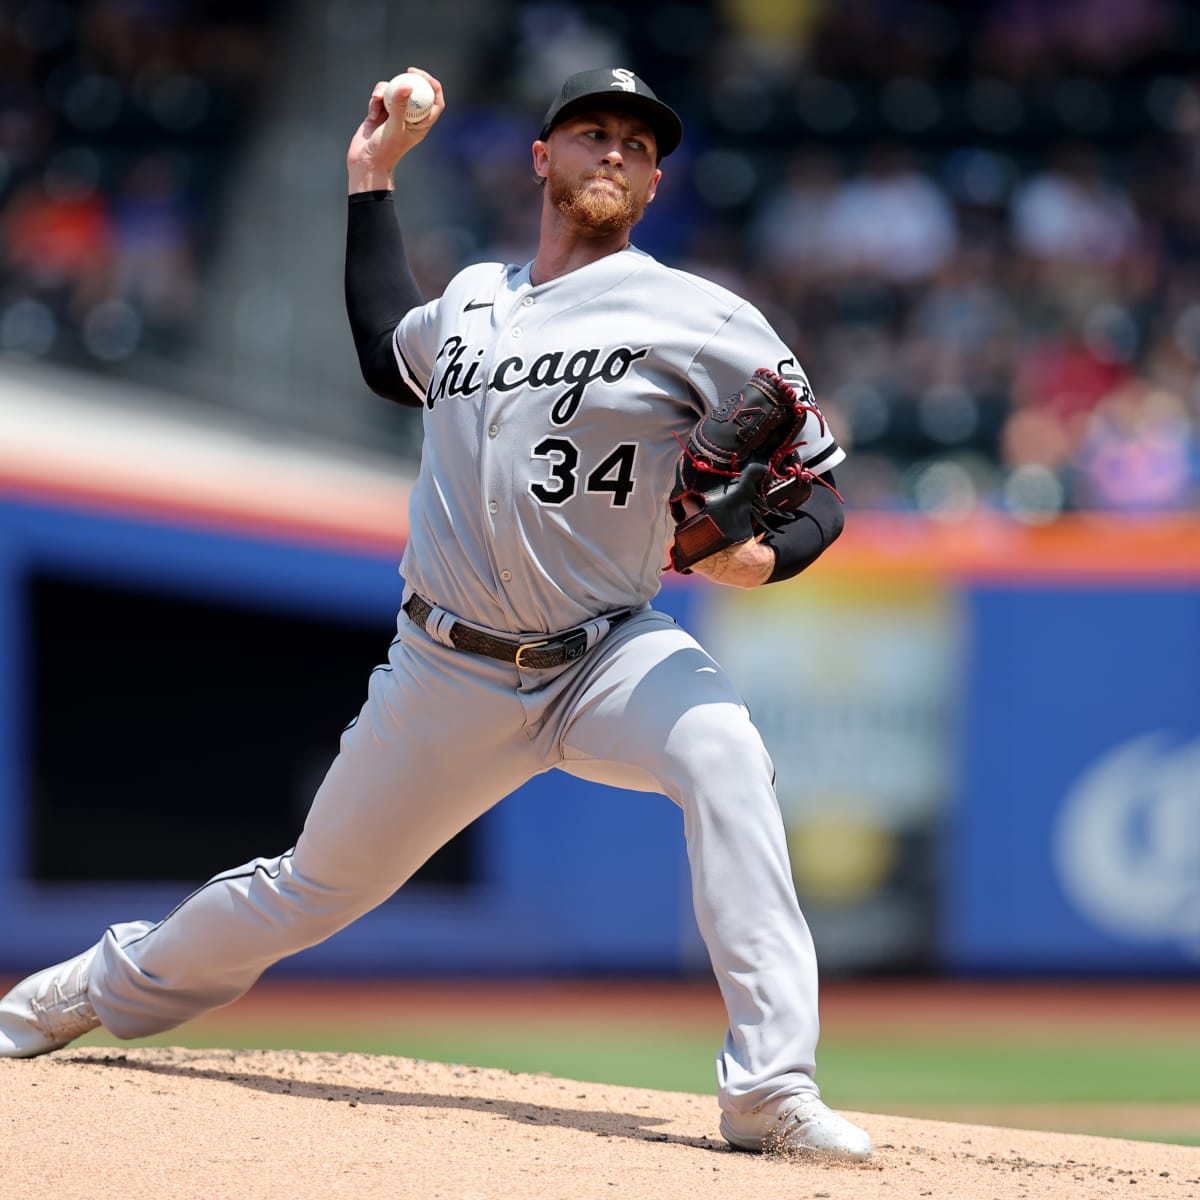 White Sox's Liam Hendriks breaks silence after injury